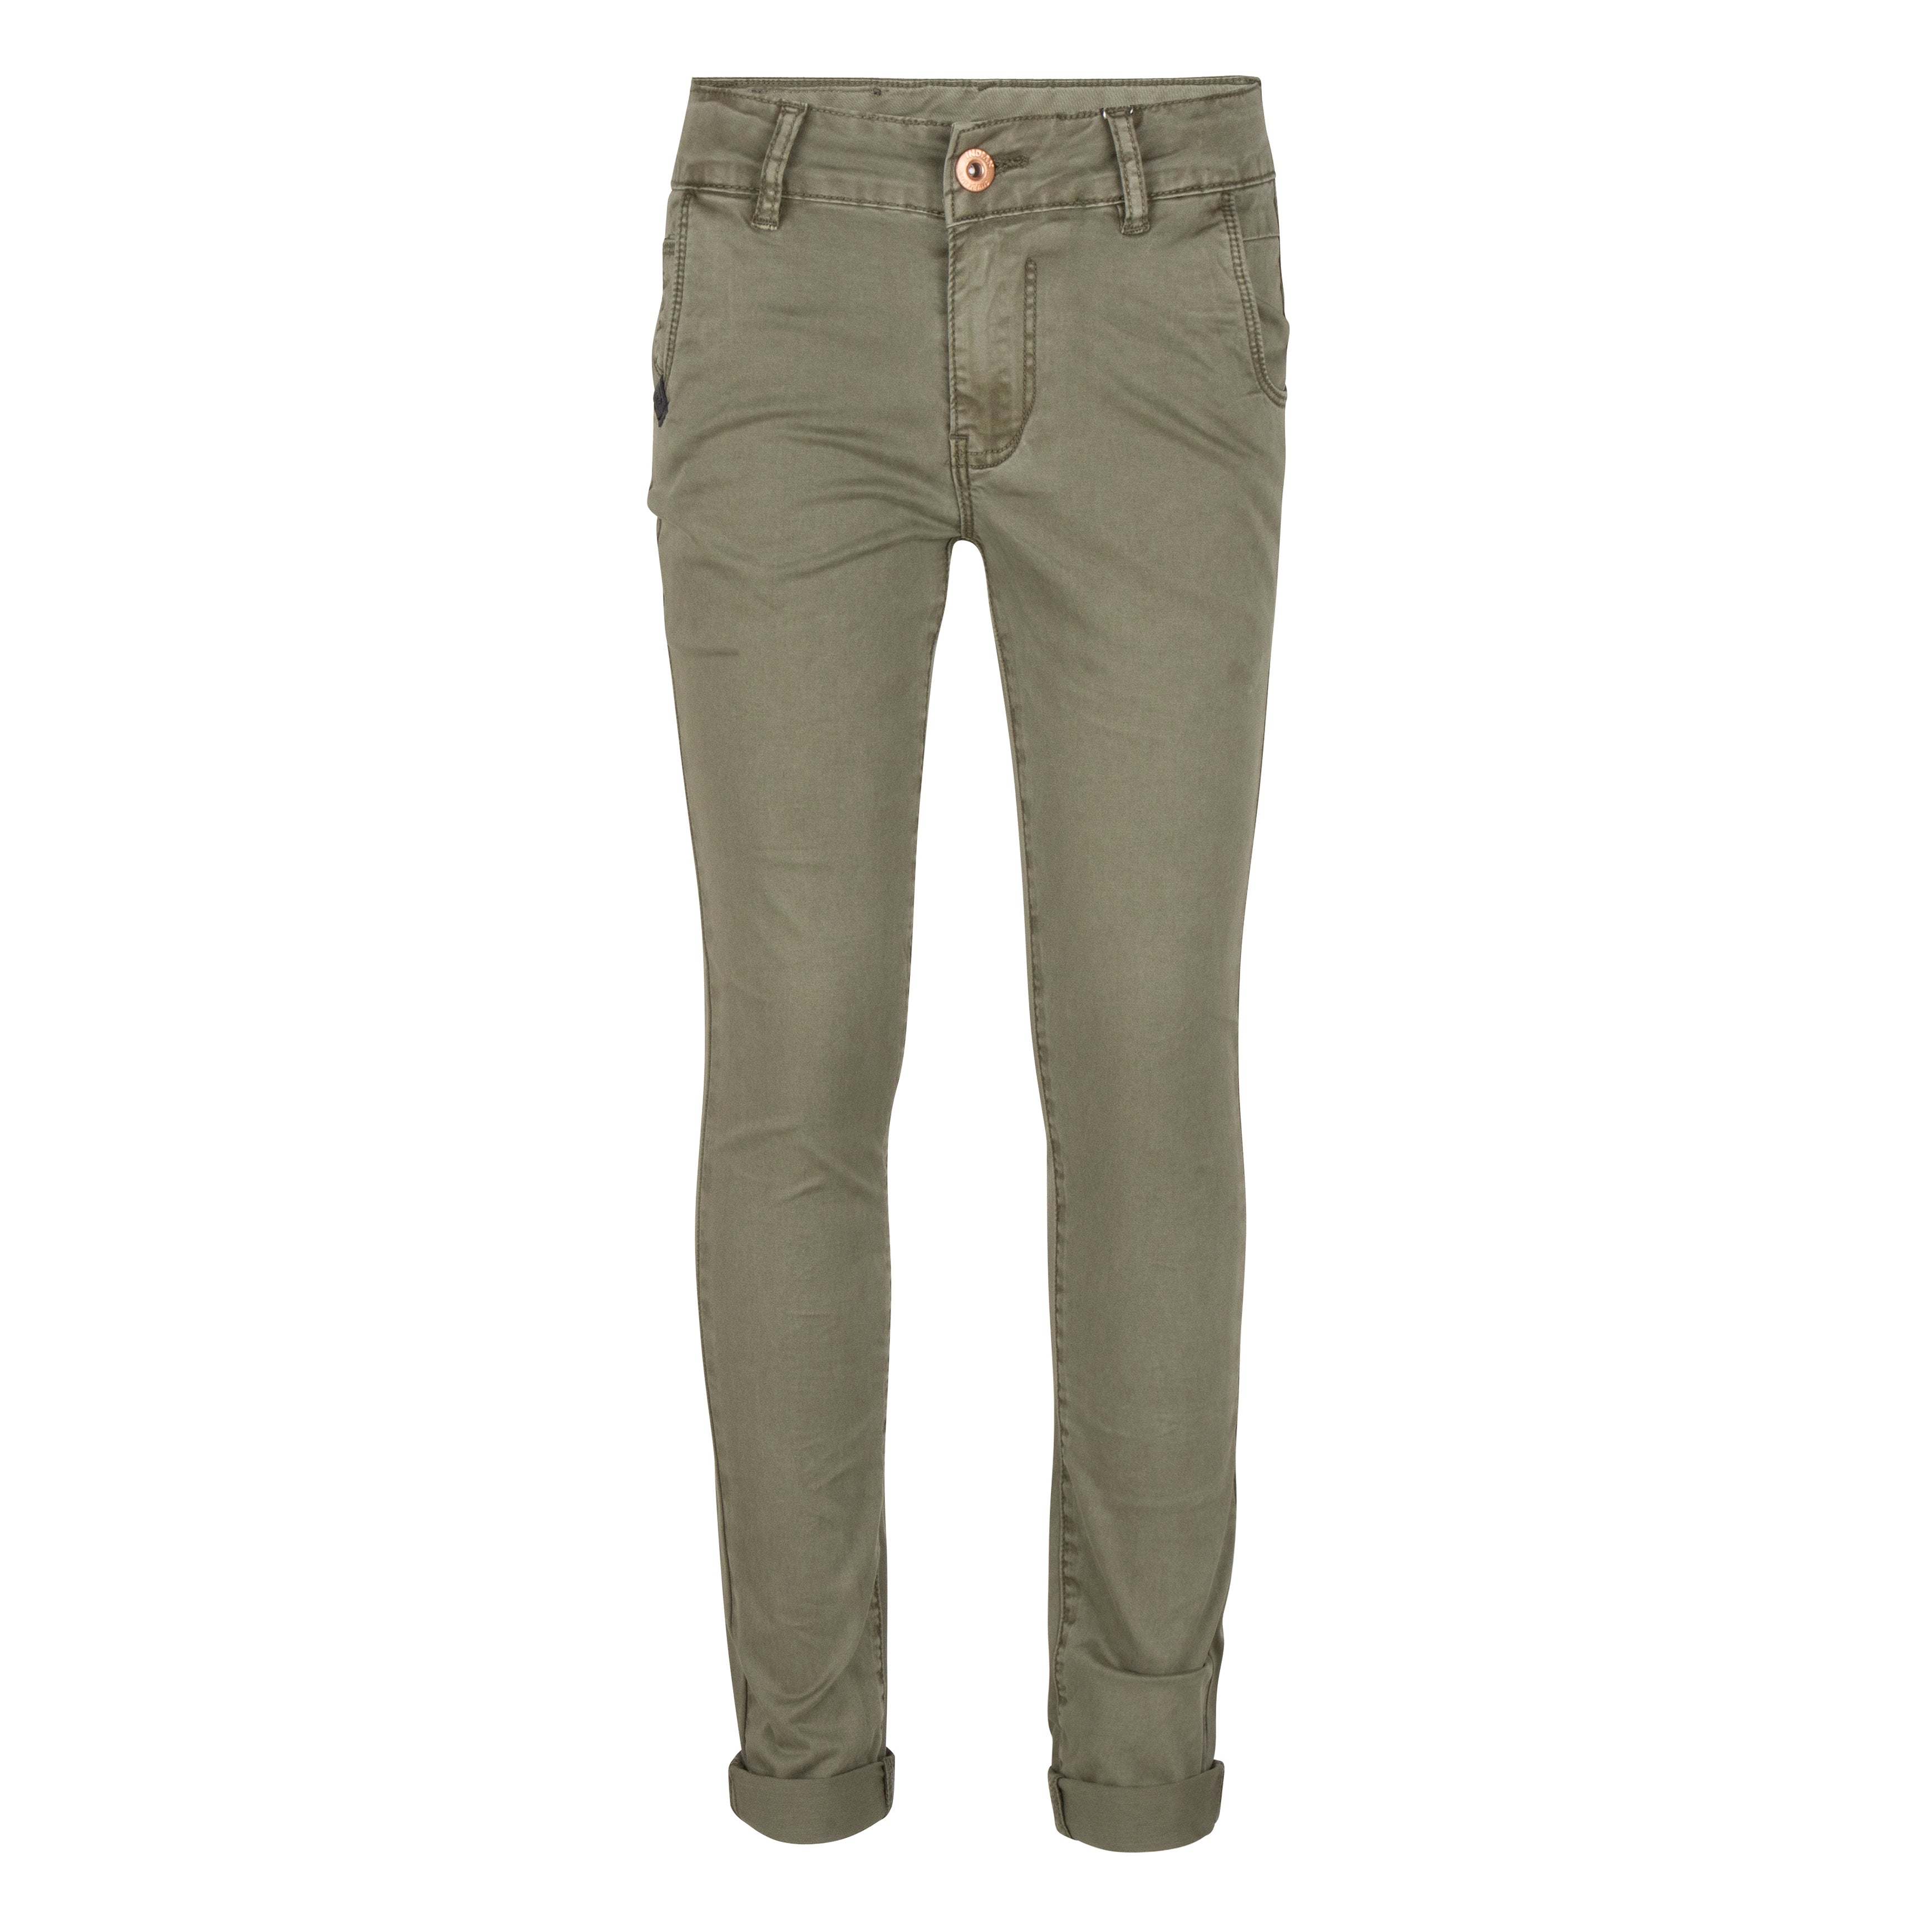 Indian Blue Jeans Chino Pant